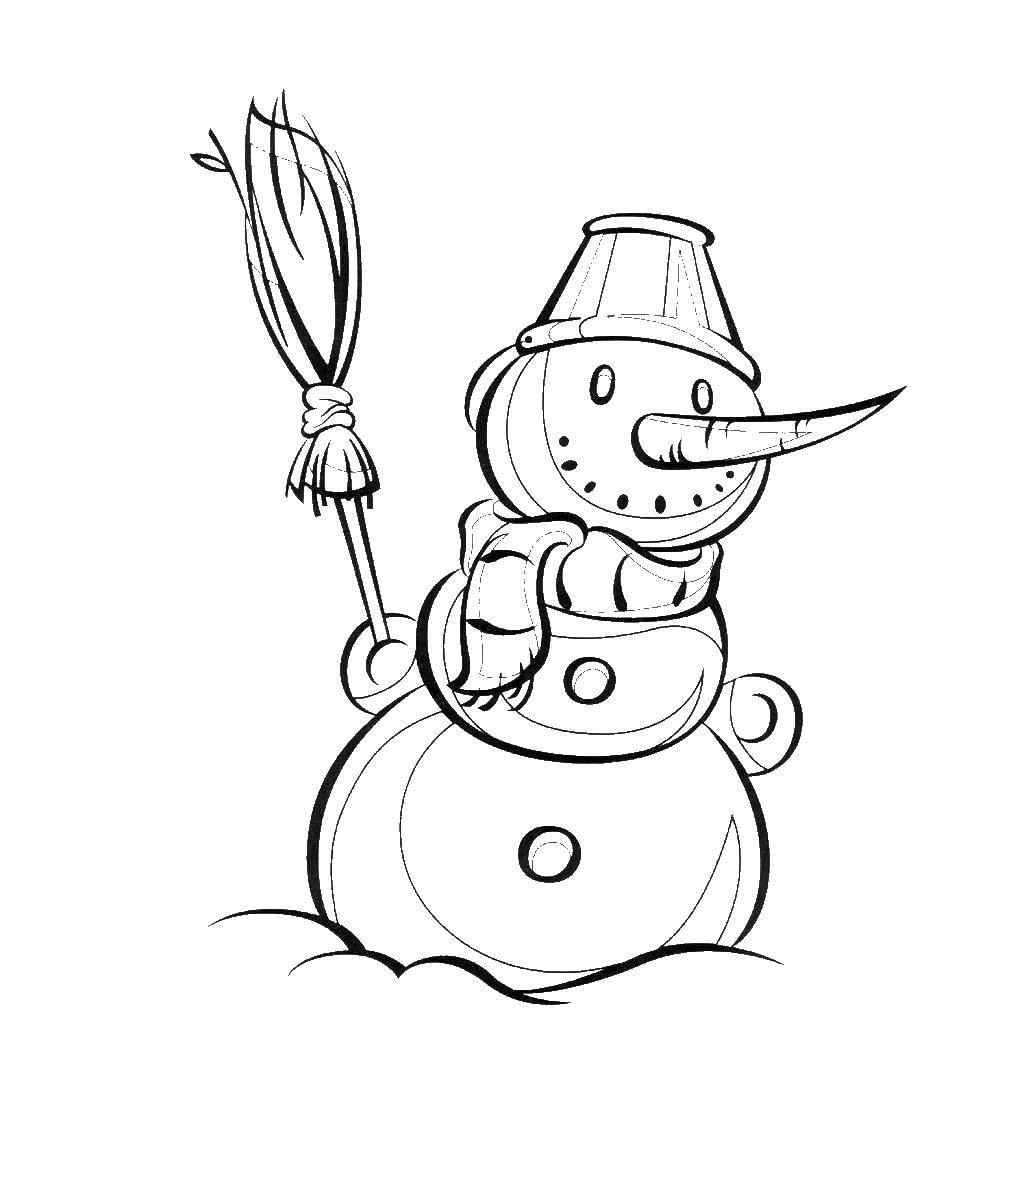 Coloring Snegovichok. Category winter. Tags:  Snowman, snow, winter.